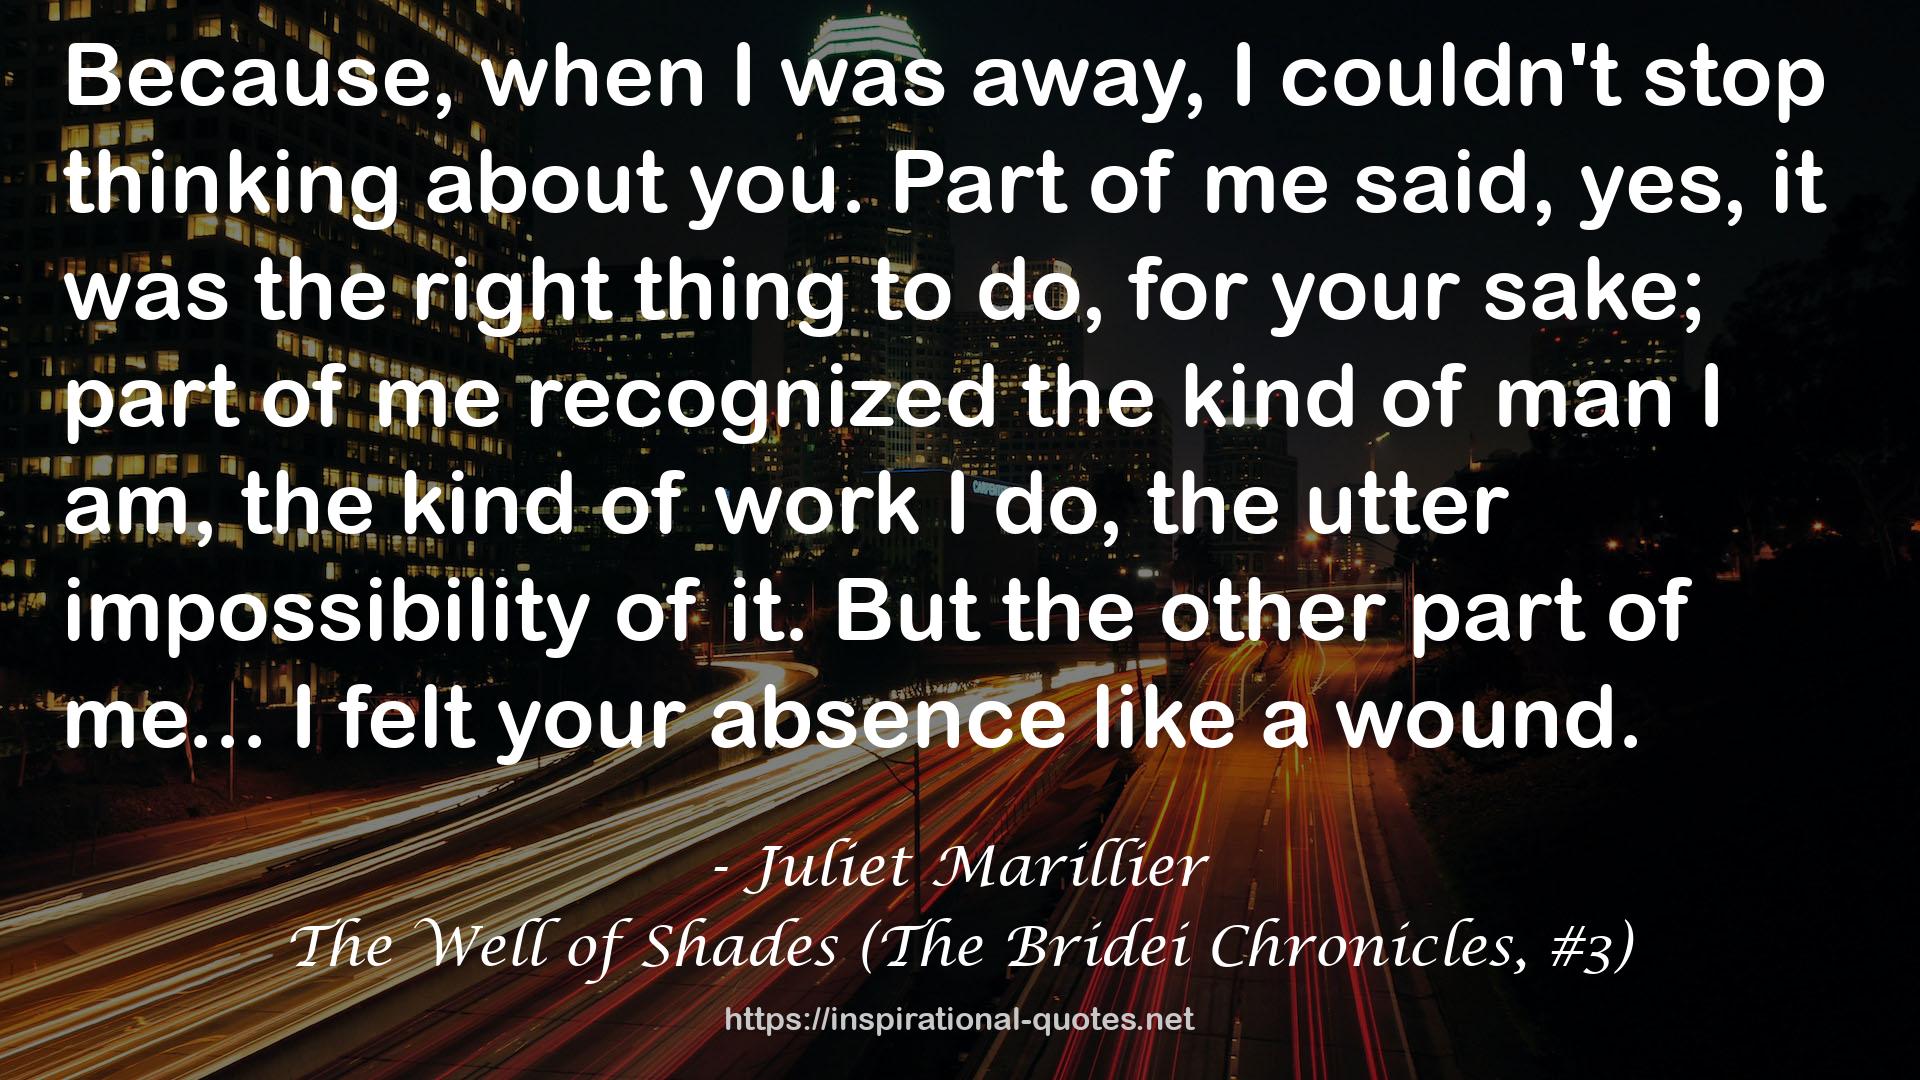 The Well of Shades (The Bridei Chronicles, #3) QUOTES